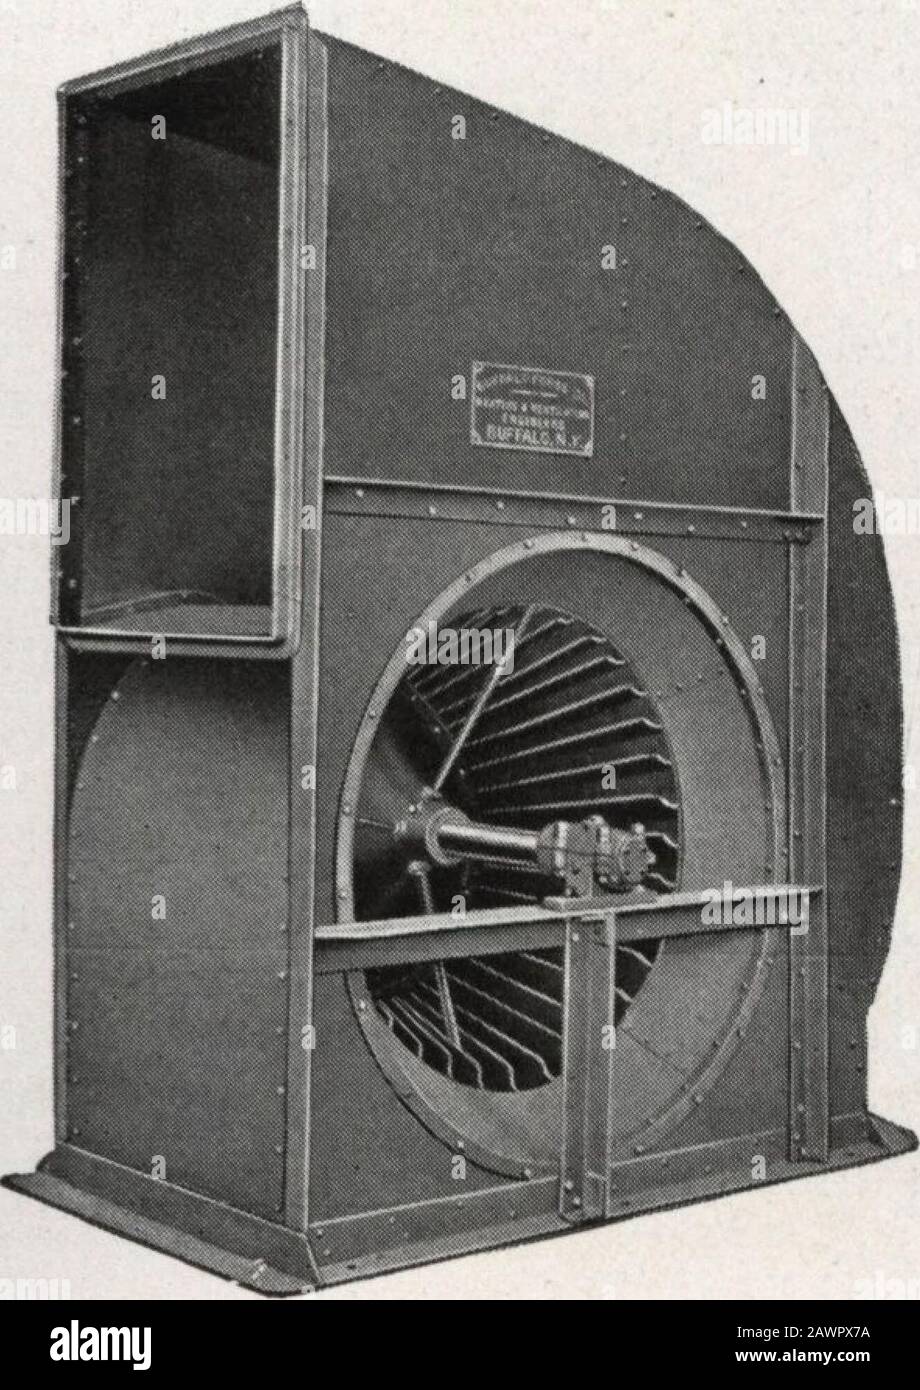 Catalog no201: Buffalo Niagara conoidal fans . lto deflect the entering air to the bladeswith the least resistance and loss in power.It is attached to the shaft by key and setscrews and at the back widens out into adisk which is hot-riveted to the back plate. Four forged tie rods are screwed intothe hub and are attached to the conicalflange at the inlet edgeof the wheel. Theserods are placed at an angle to the inletwhich offers the least resistance to theentering air. Nia^ara Conoidal Wheel HOUSING The housing is of modified shapeas previously described, constructed ofheavy steel plate with ri Stock Photo